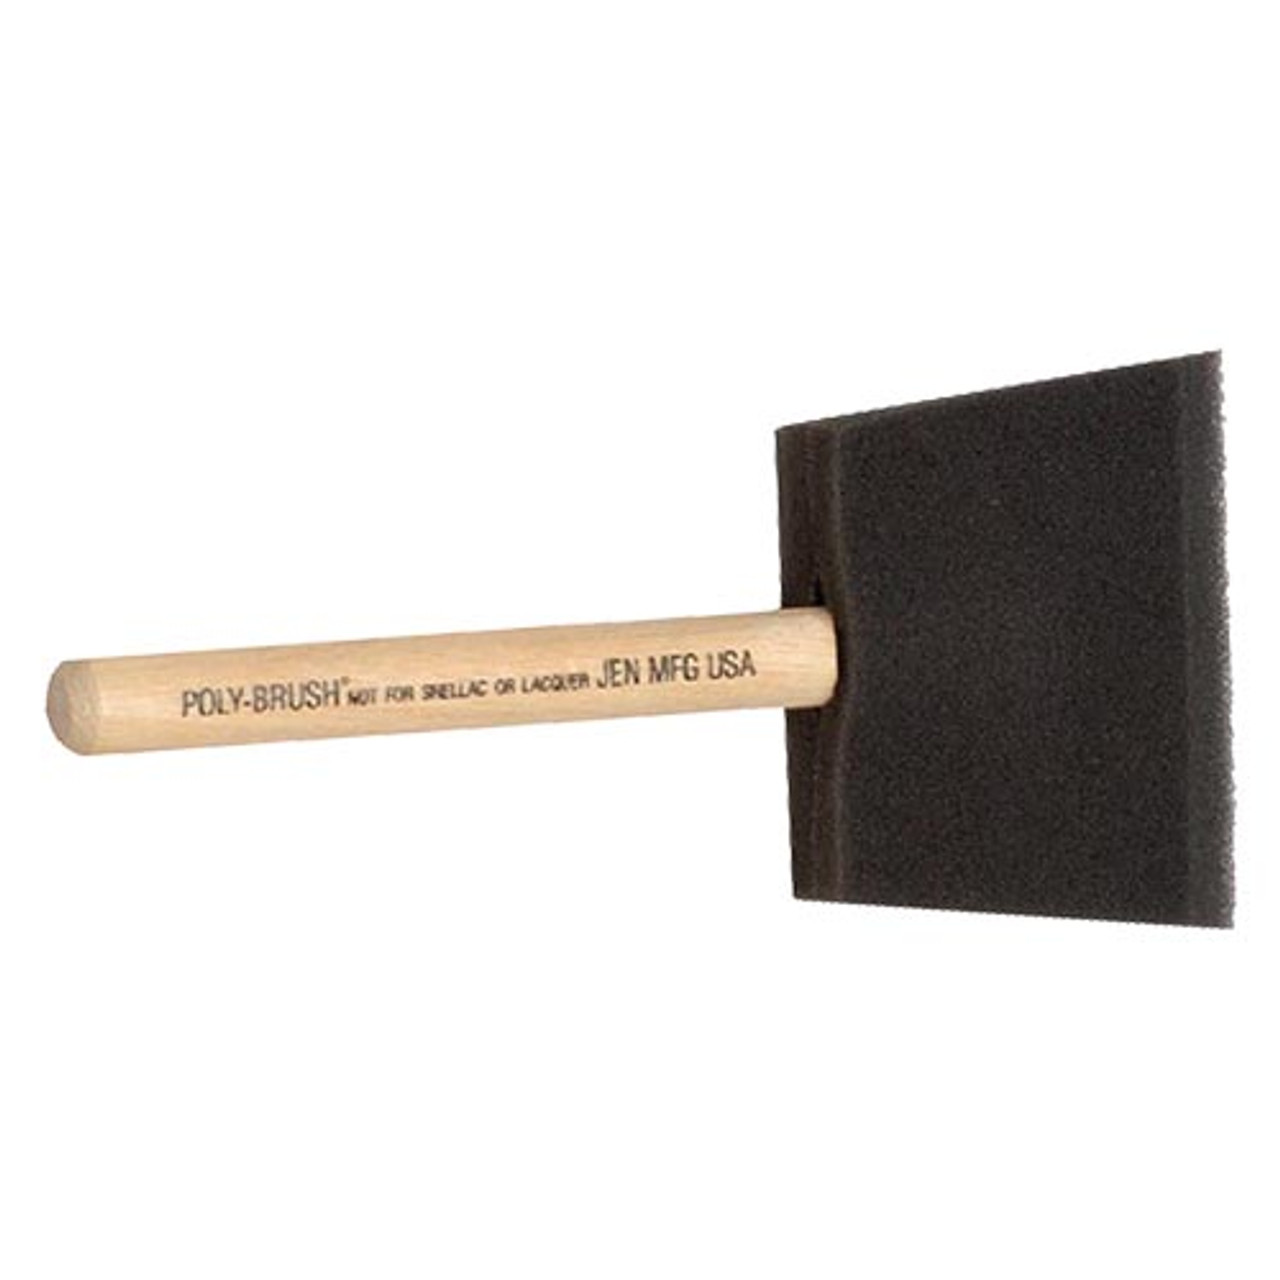 Jen Disposable Brush, 3, Qty. 1 - Midwest Technology Products